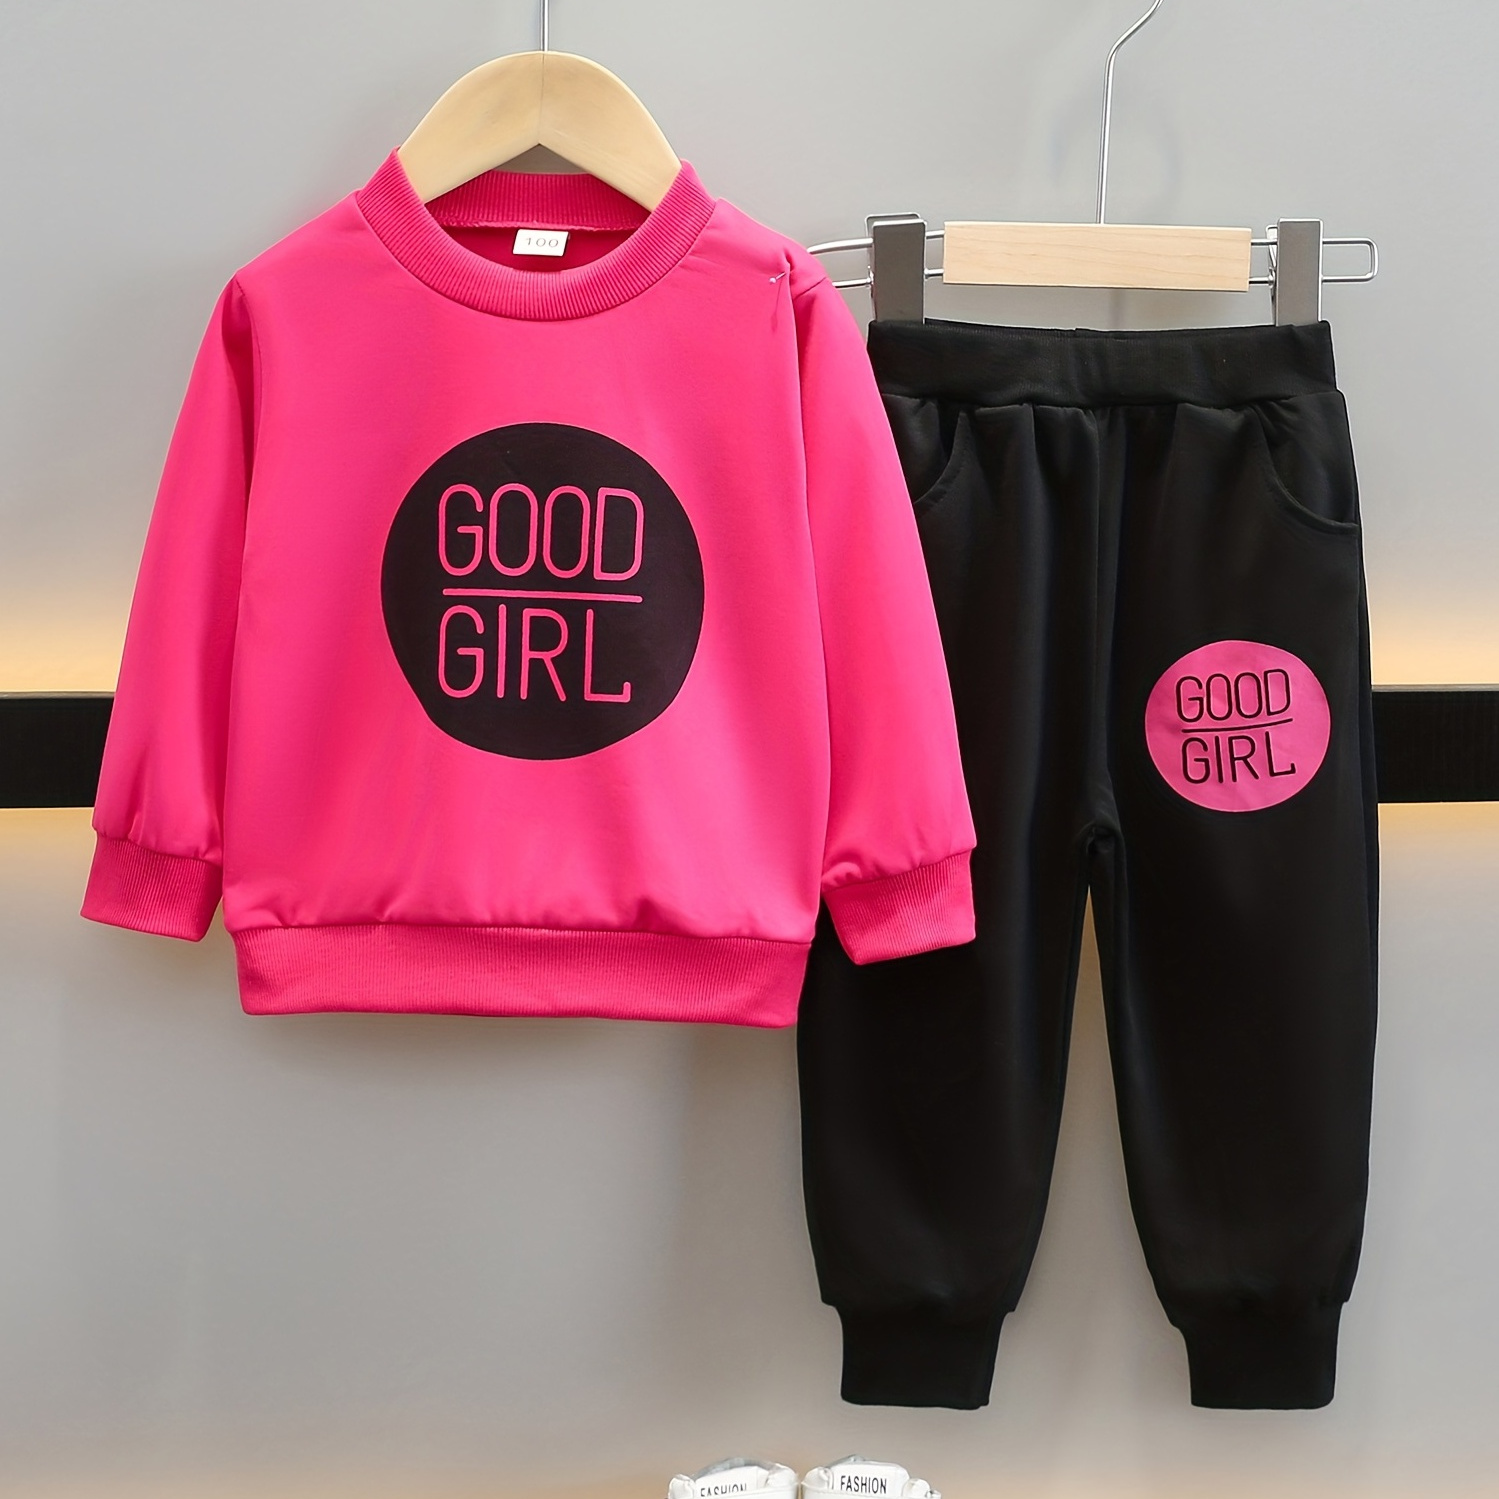 

2pcs Girl's Color Clash Outfit, Good Girl Print Sweatshirt & Sweatpants Set, Toddler Kid's Clothes For Spring Fall